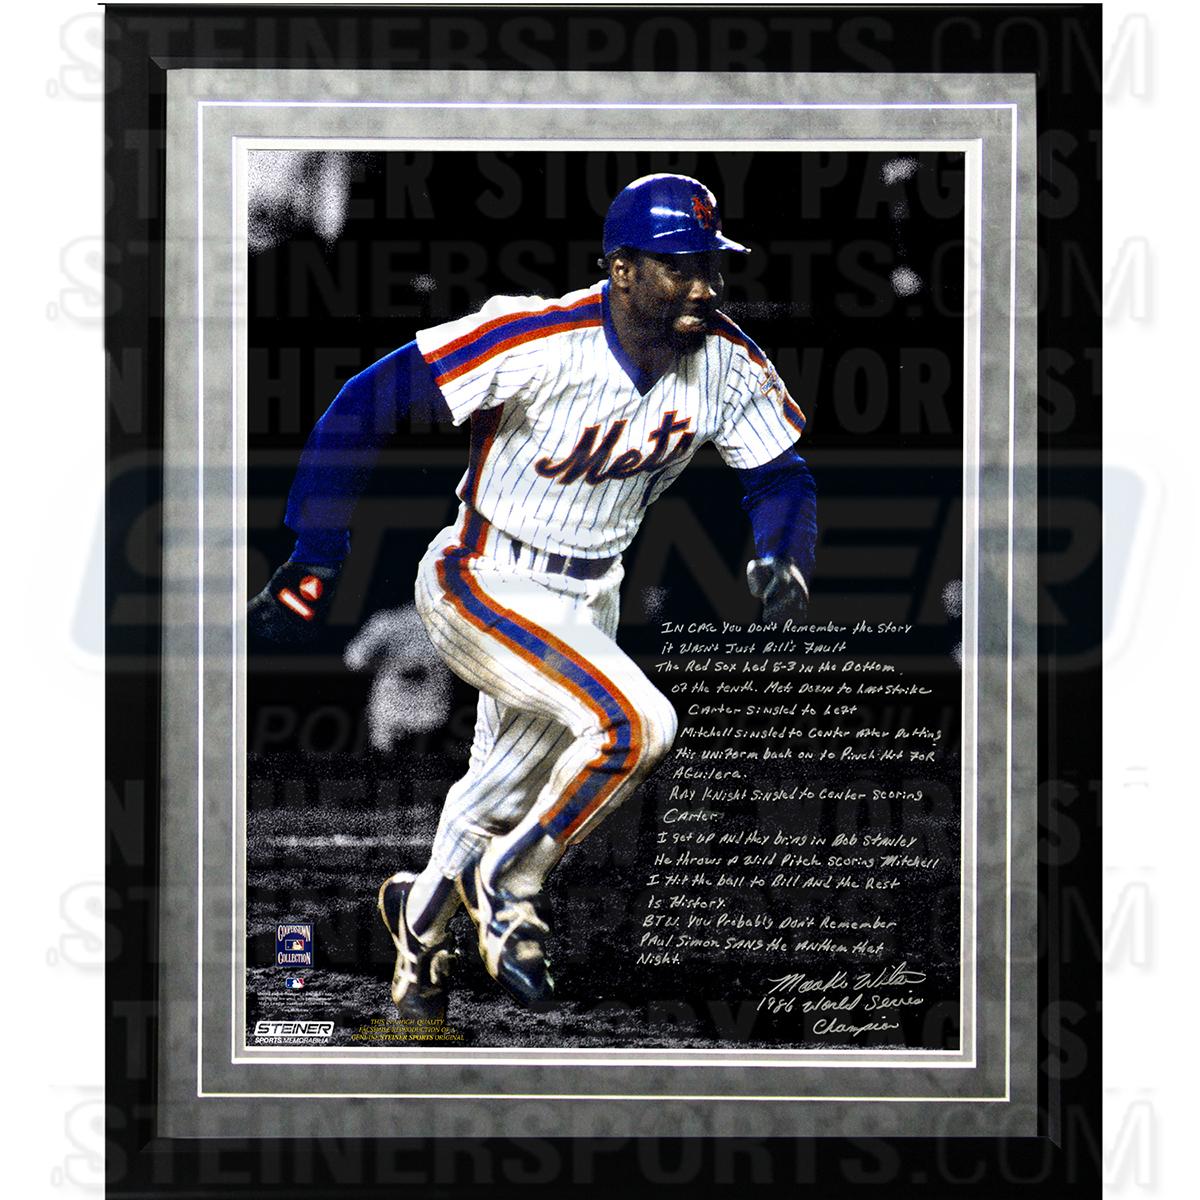 Happy birthday Mookie Wilson!

Take a look at this hand-written story about the 86 ->  